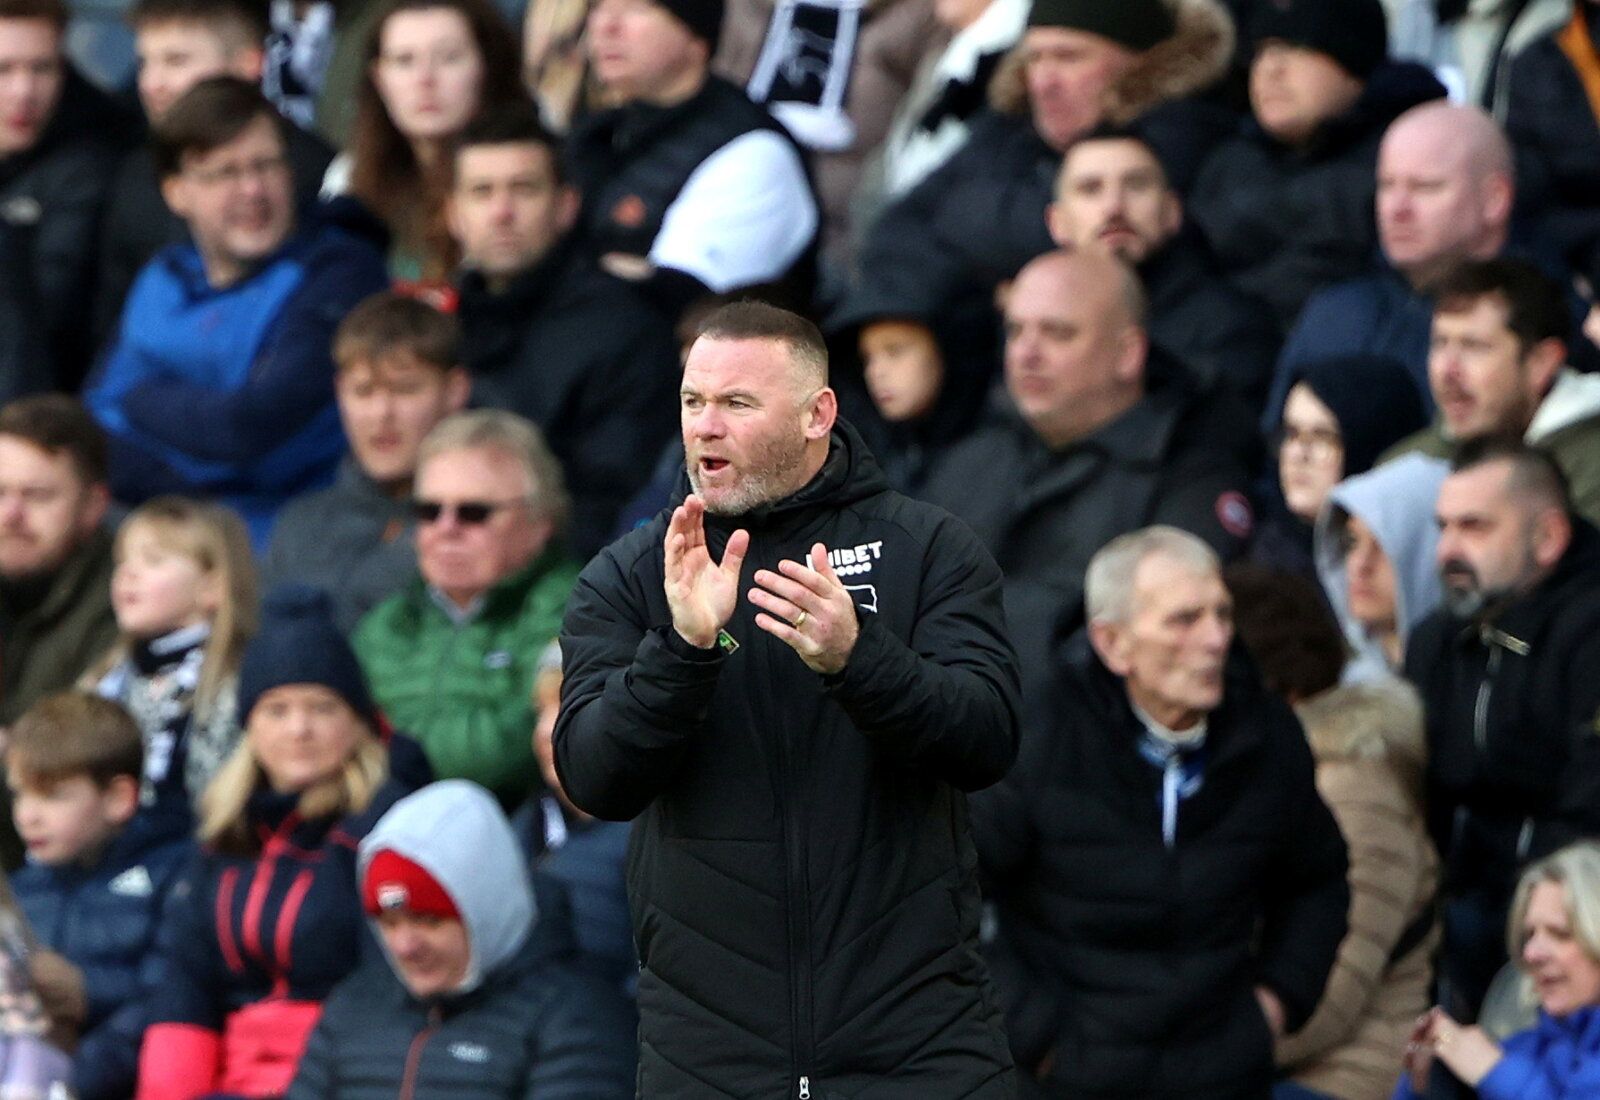 Soccer Football - Championship - Derby County v AFC Bournemouth - Pride Park, Derby, Britain - November 21, 2021 Derby County's manager Wayne Rooney Molly Darlington/Action Images